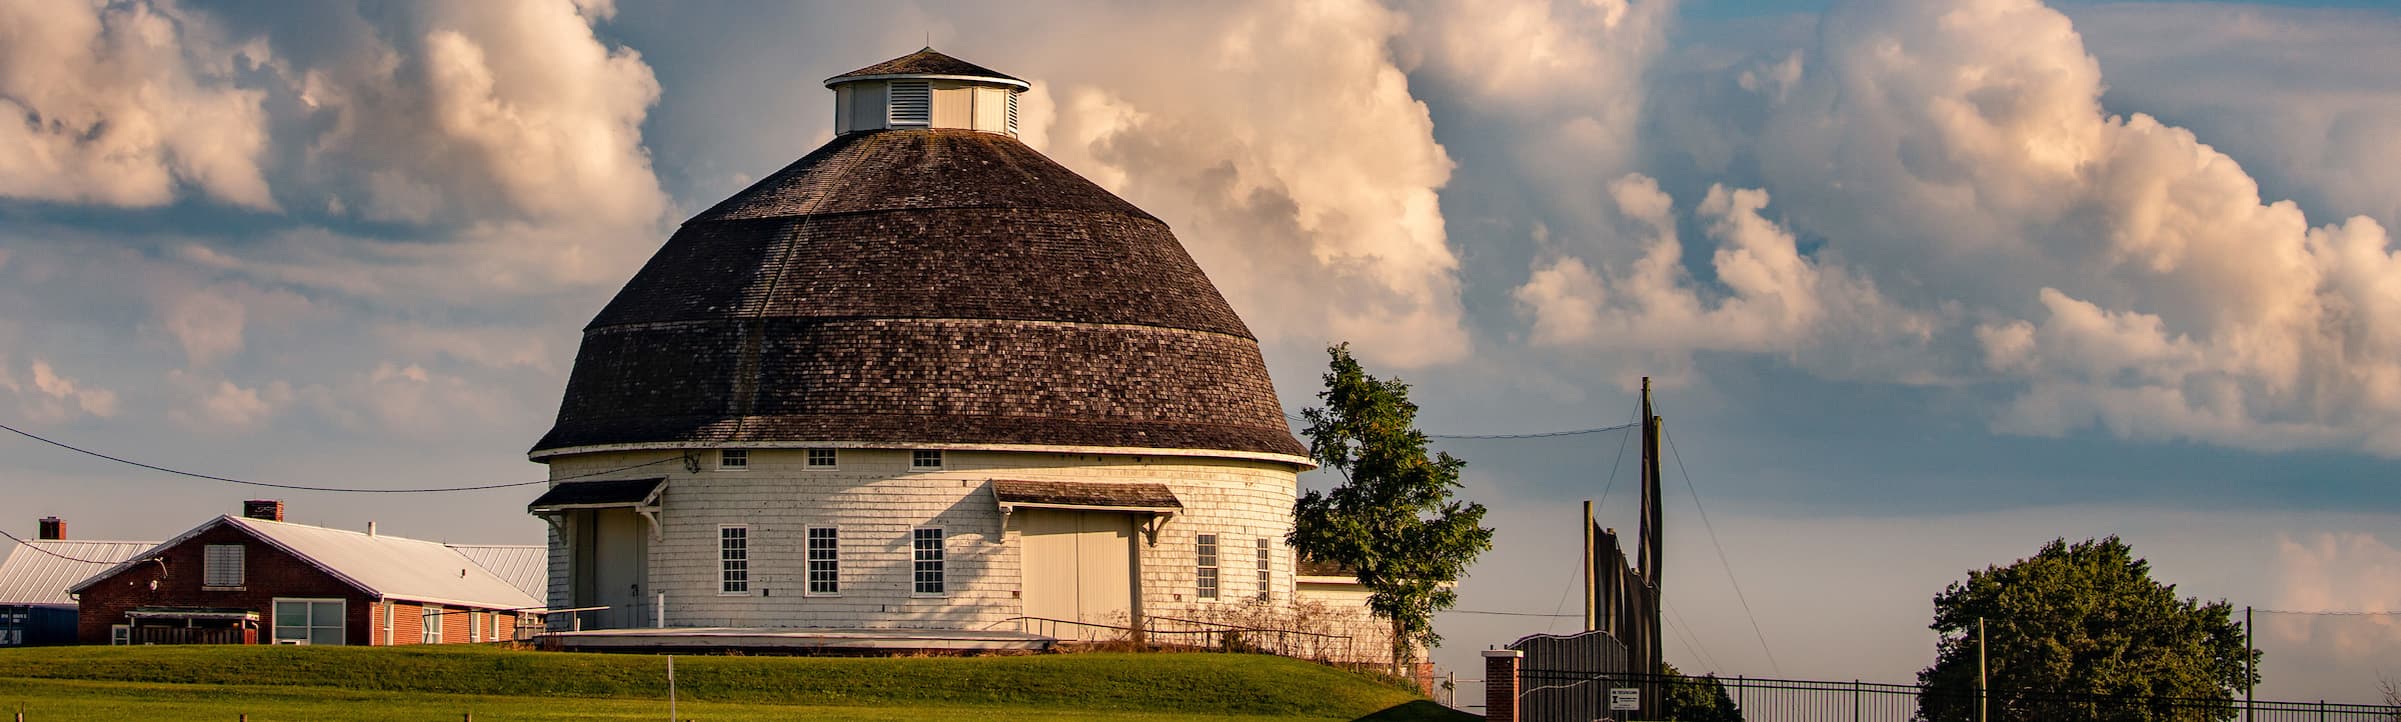 roundbarn in spring with cloudy sky